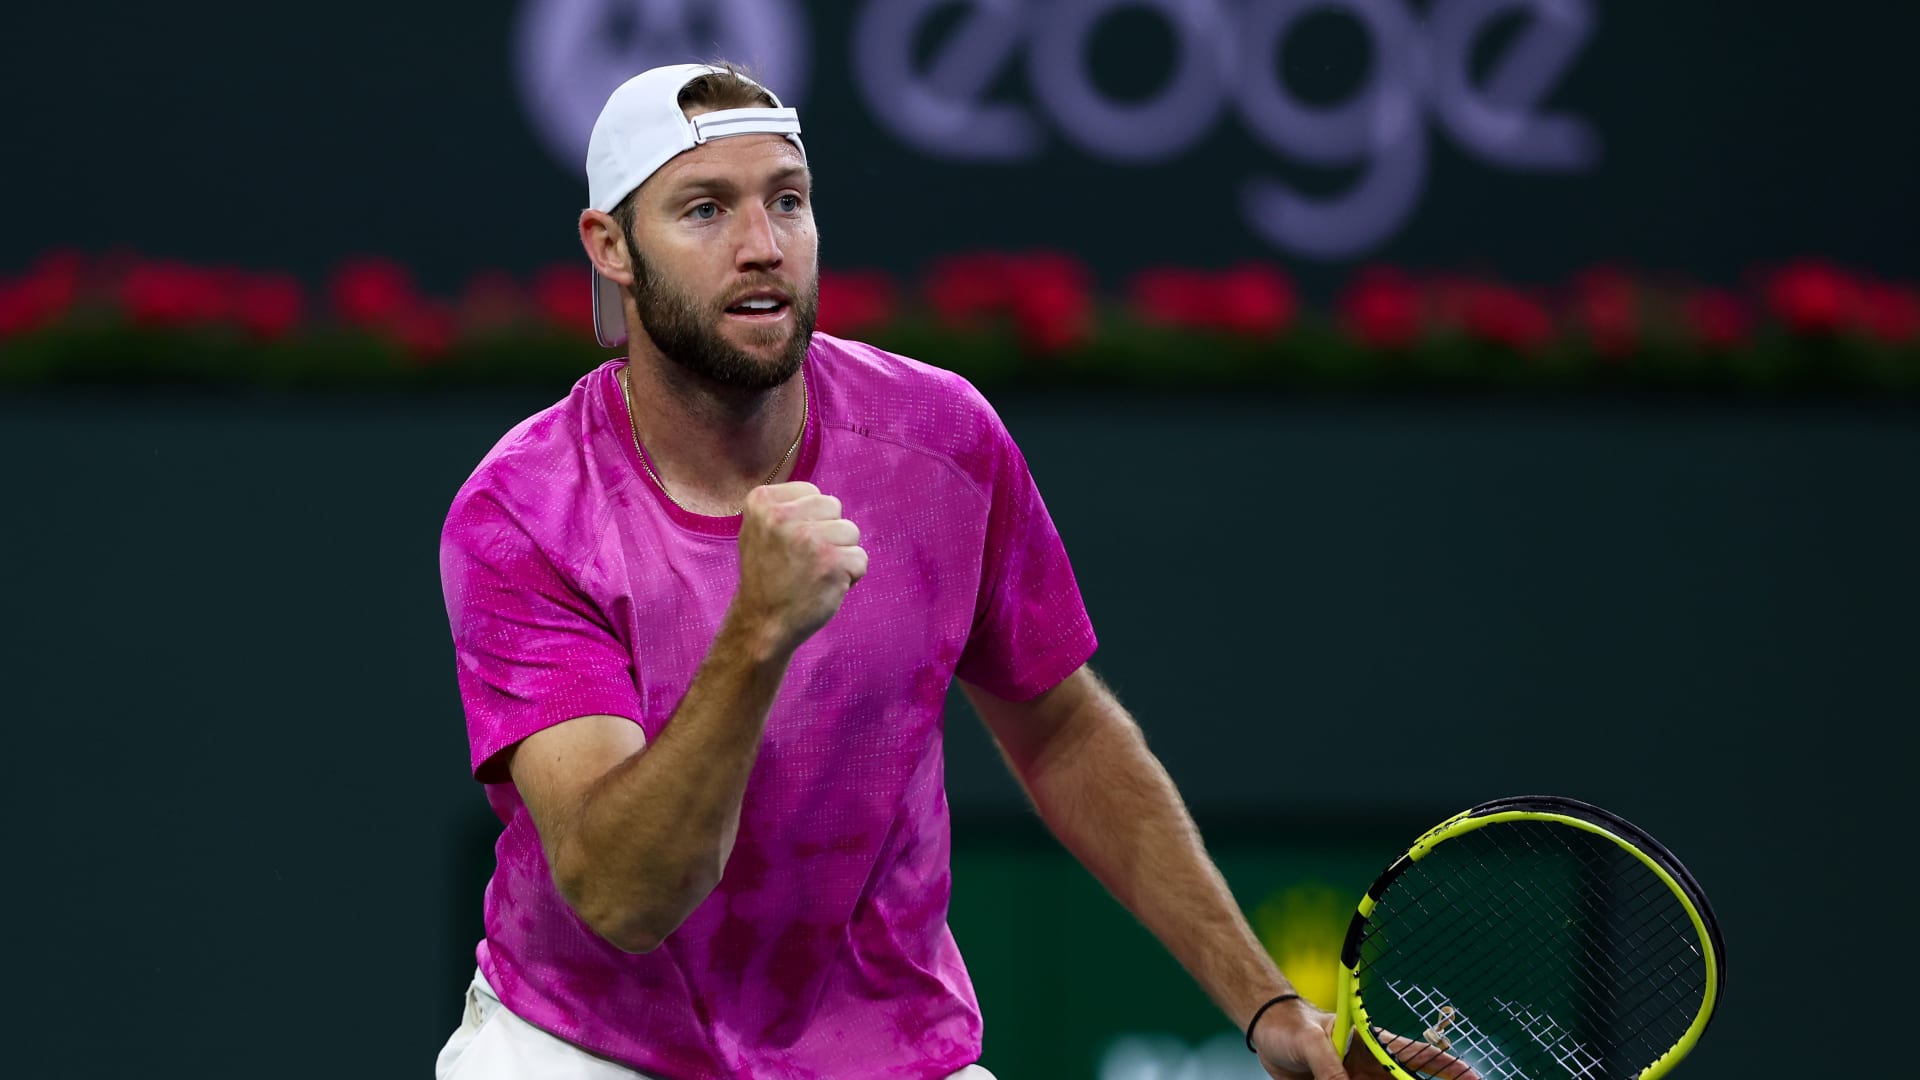 After starting over in the rankings, a more mature Jack Sock is